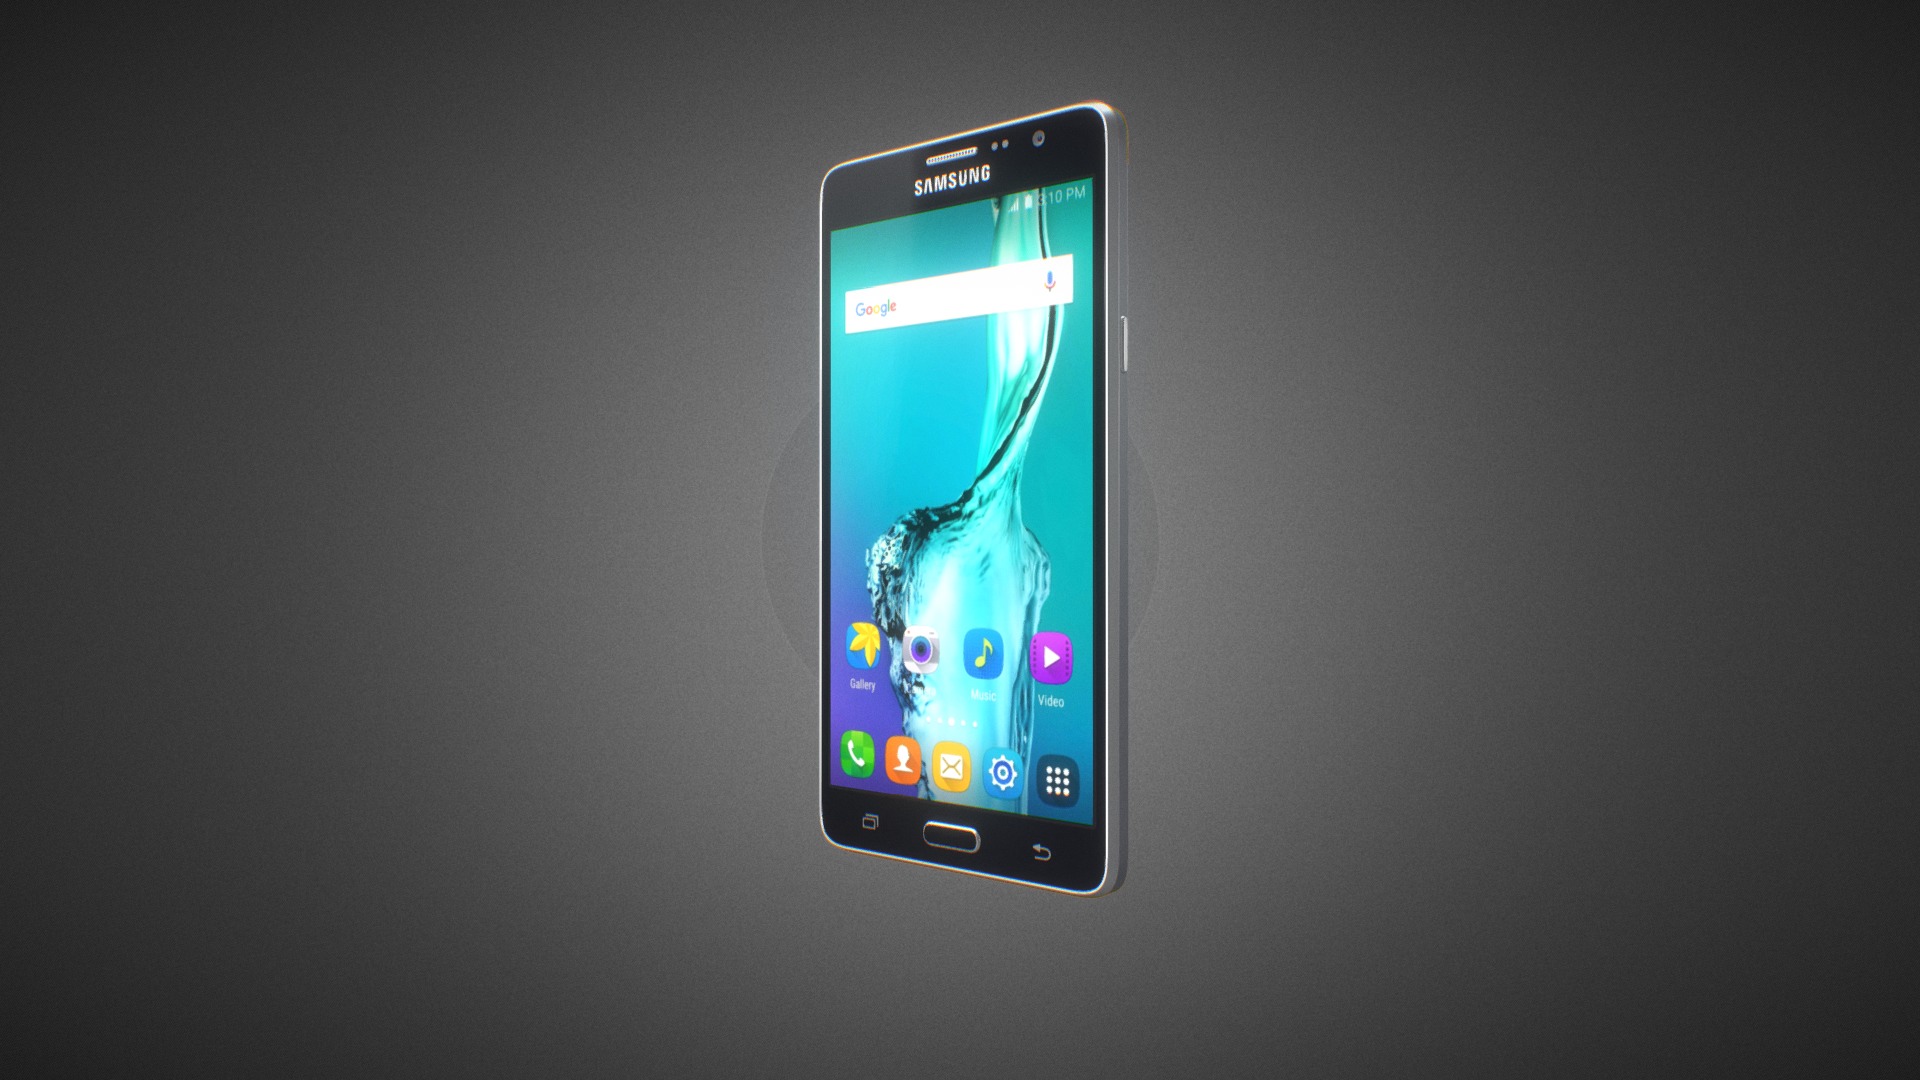 3D model Samsung Galaxy On7 PRO for Element 3D - This is a 3D model of the Samsung Galaxy On7 PRO for Element 3D. The 3D model is about a cell phone on a table.